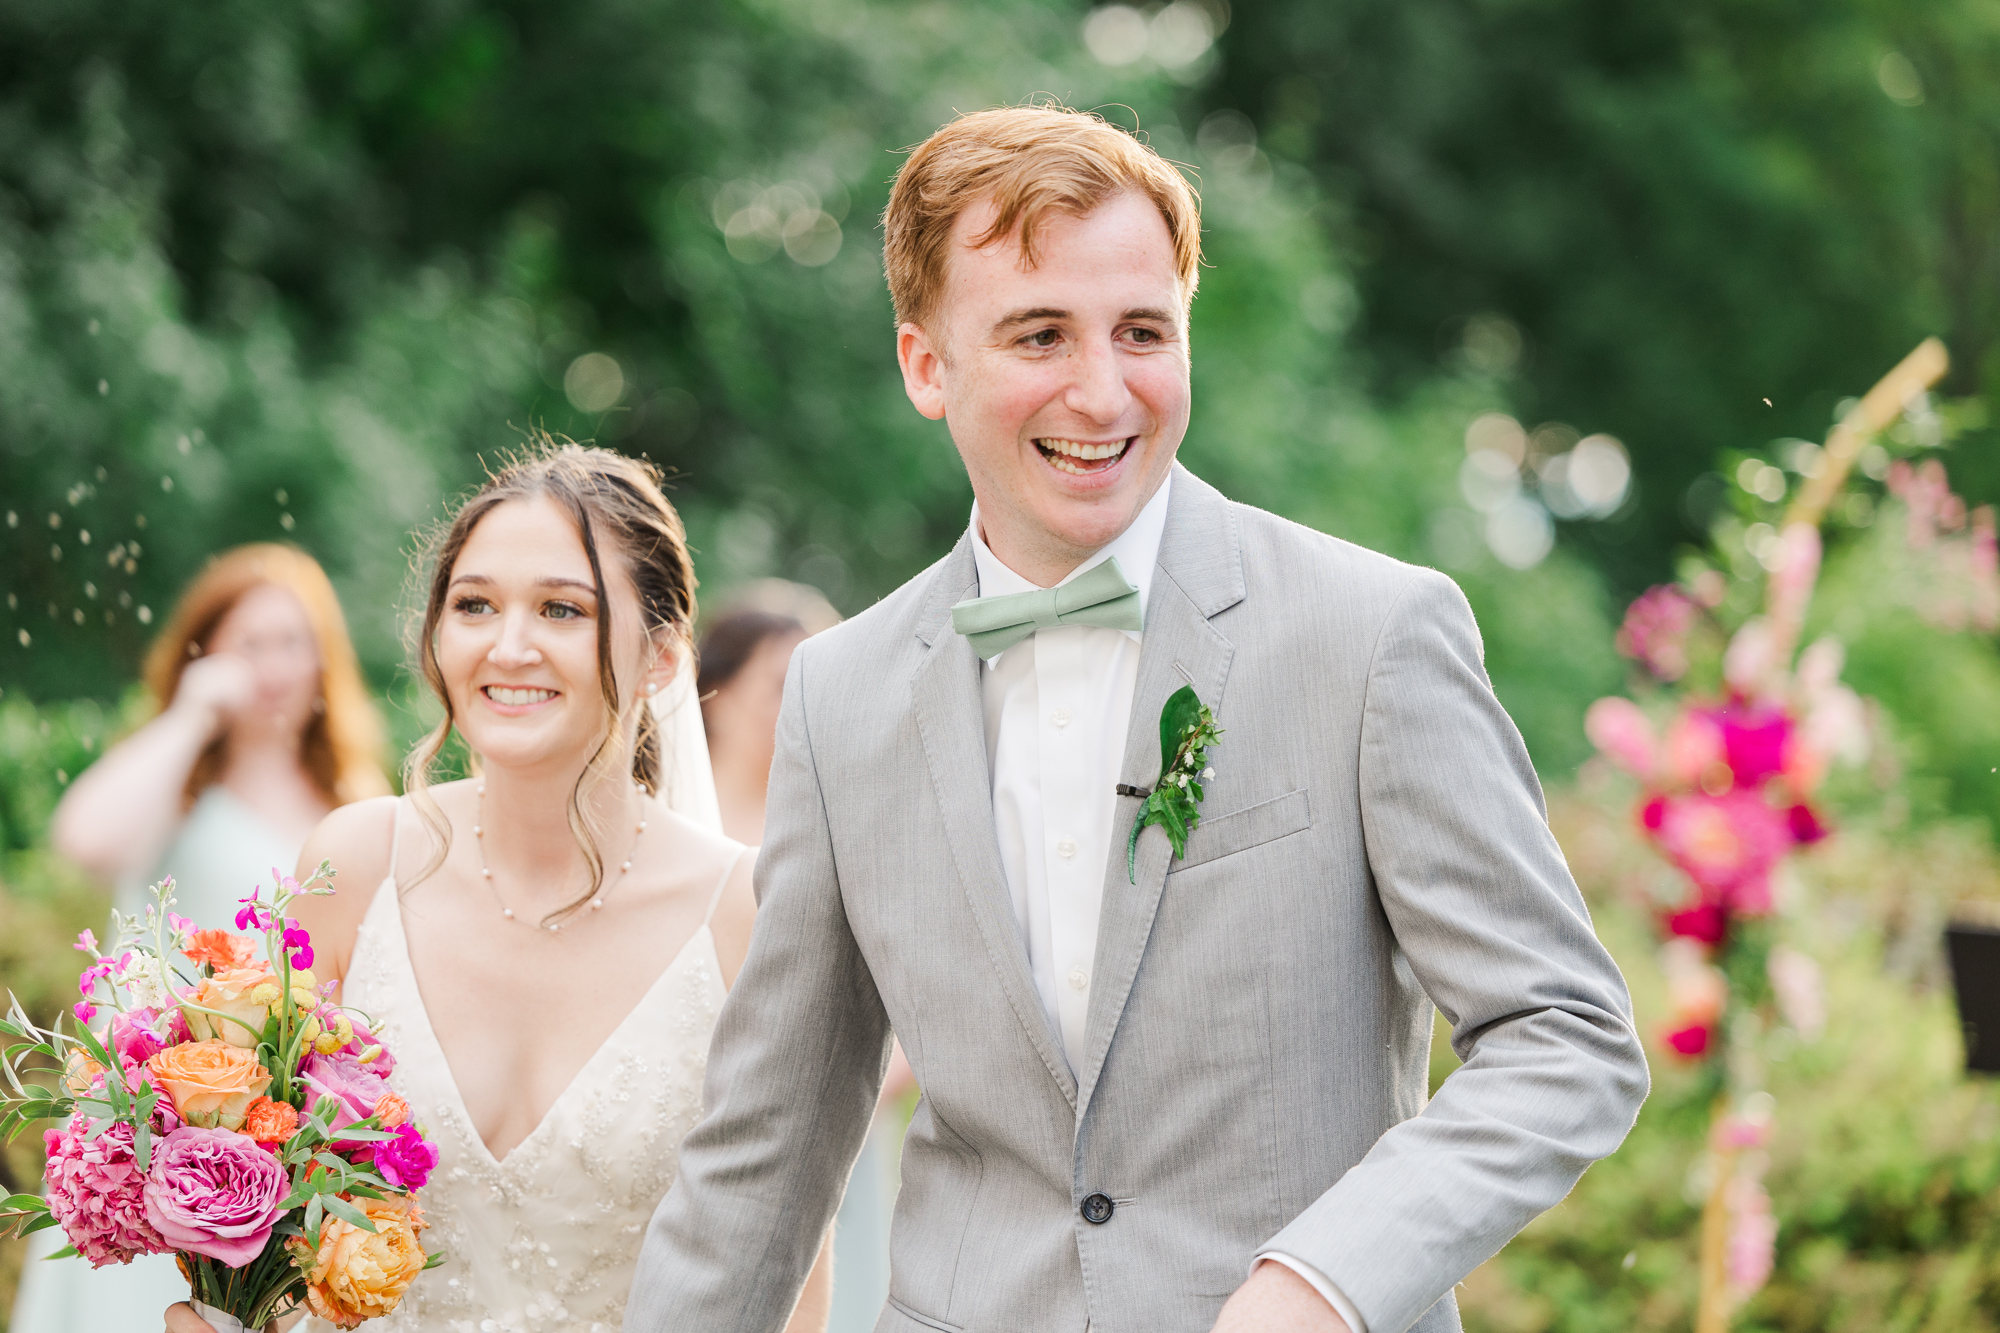 Iconic Wedding at Briarcliff Manor in Summertime